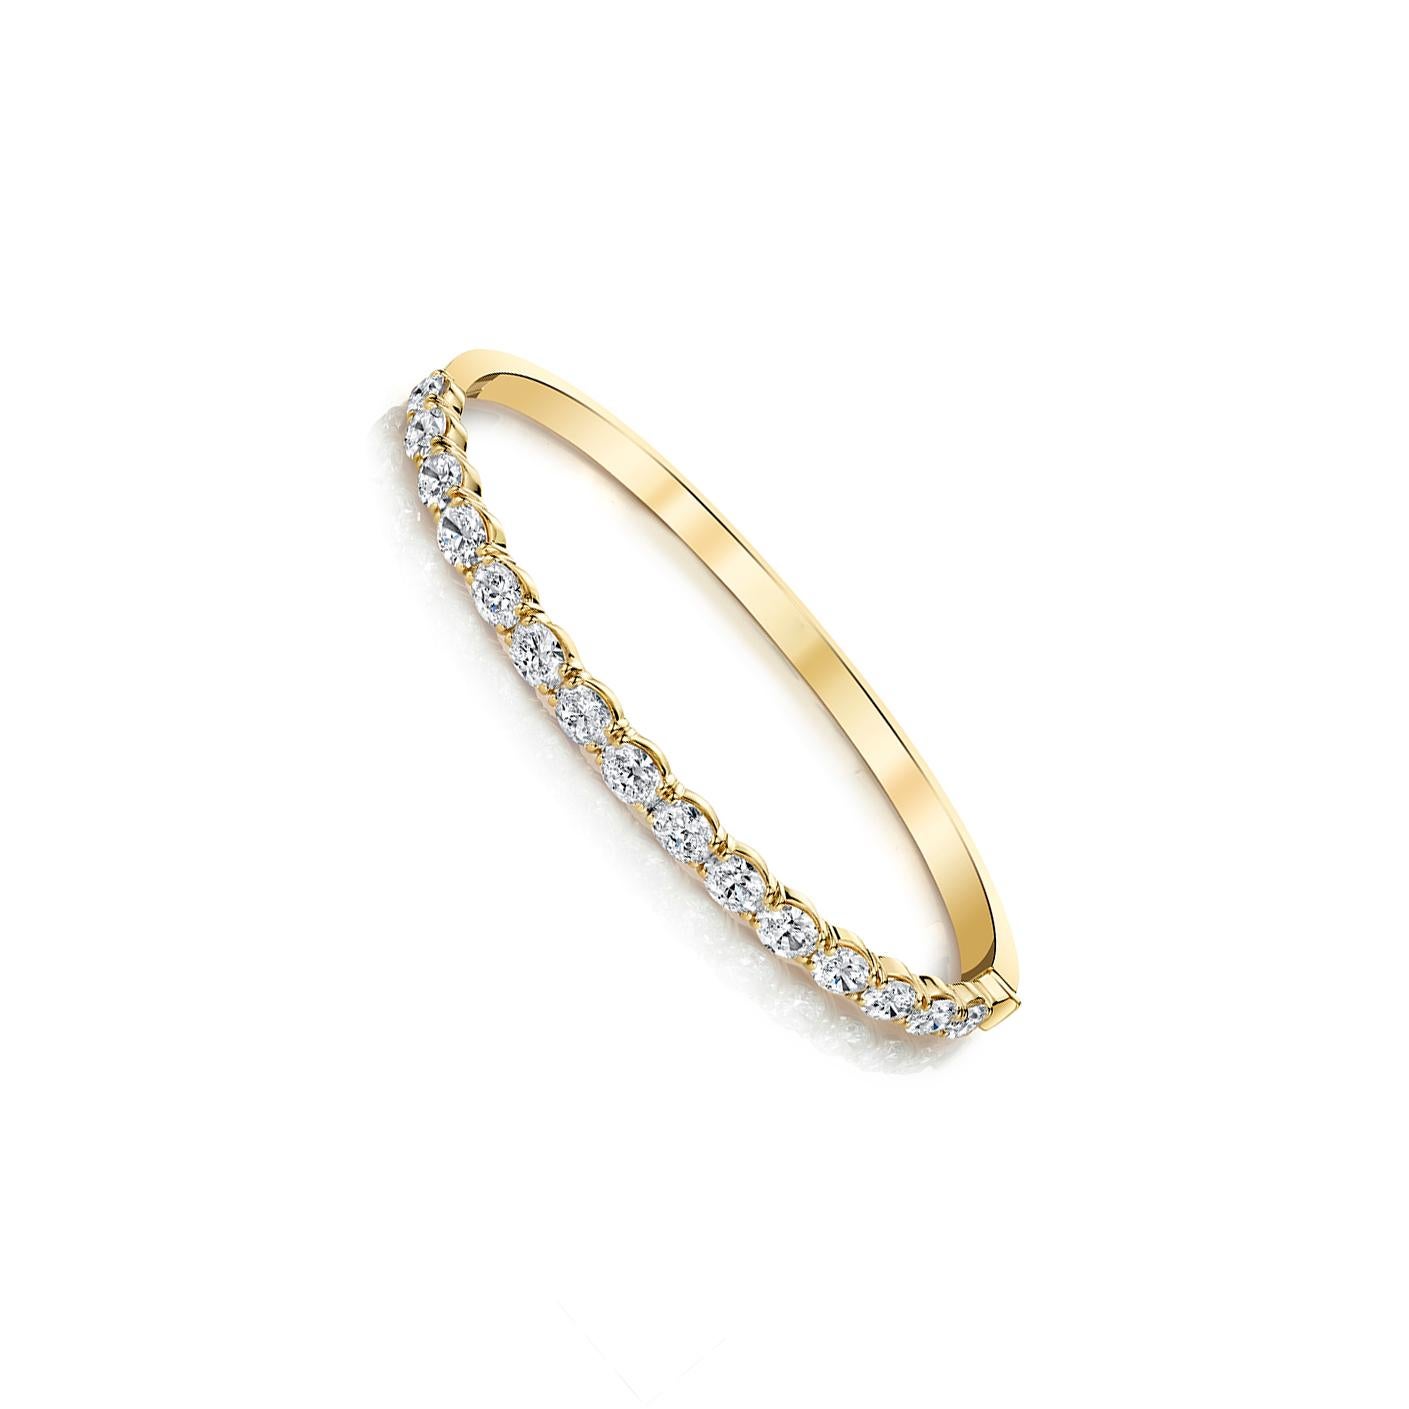 15 Oval-cut diamonds set in 18k yellow gold 4-prong bangle bracelet. 
Carat total weight 4.64 
GIA Color D-F Clarity VVS1-VS2 
Also available in 18k rose and white gold.